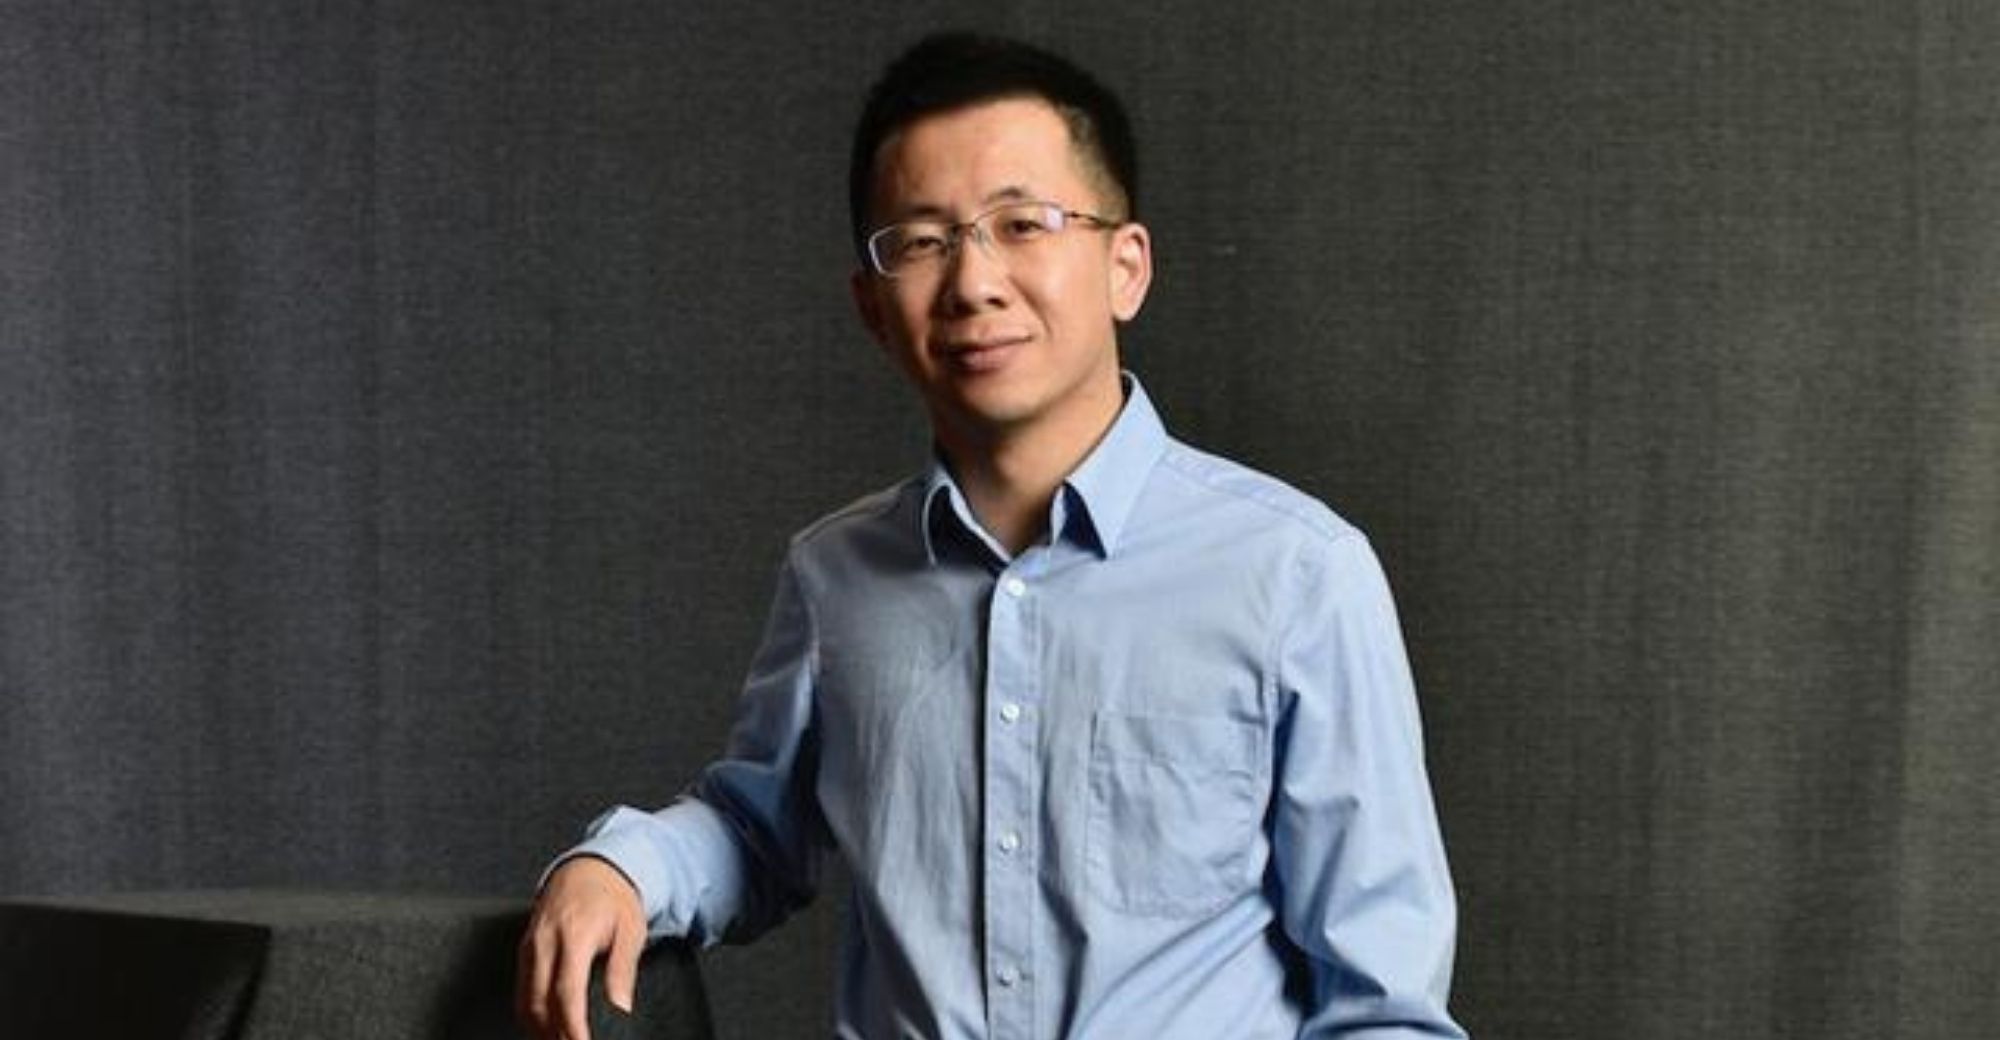 ByteDance Founder Zhang Yiming Donates $28.9M to Support Hometown Education